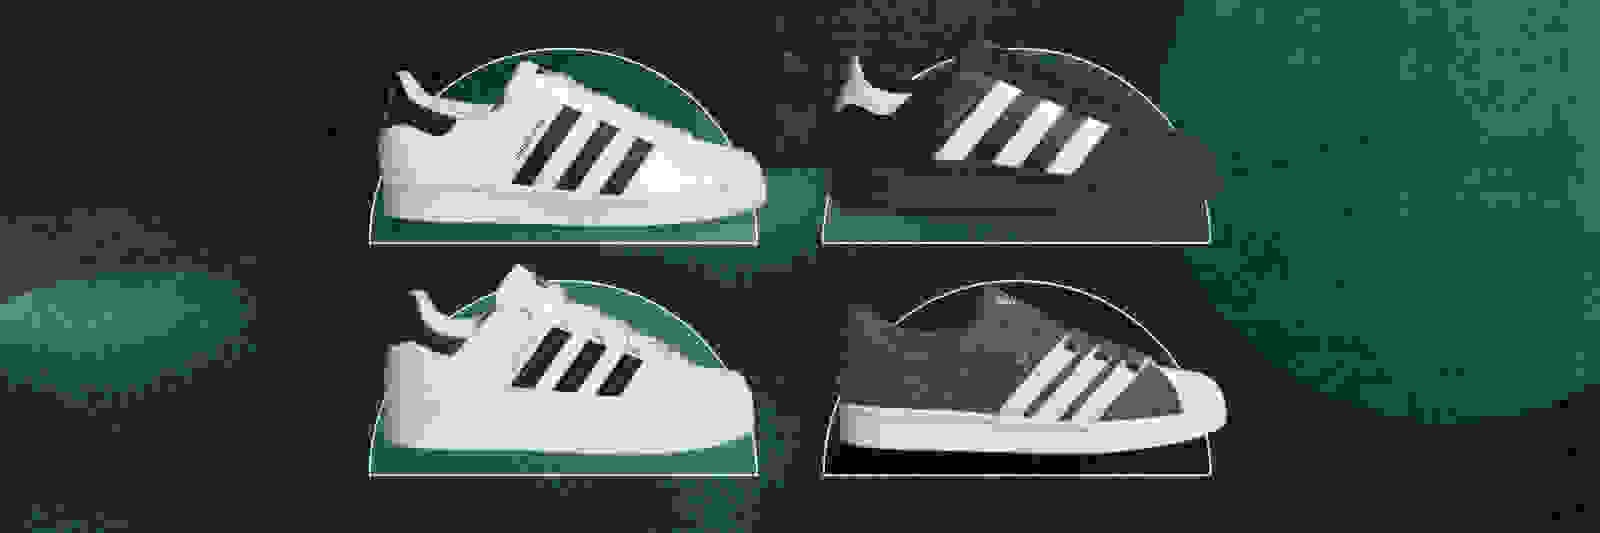 inspanning Haan het internet How Do adidas Superstar Shoes Fit? The Size Guide for All